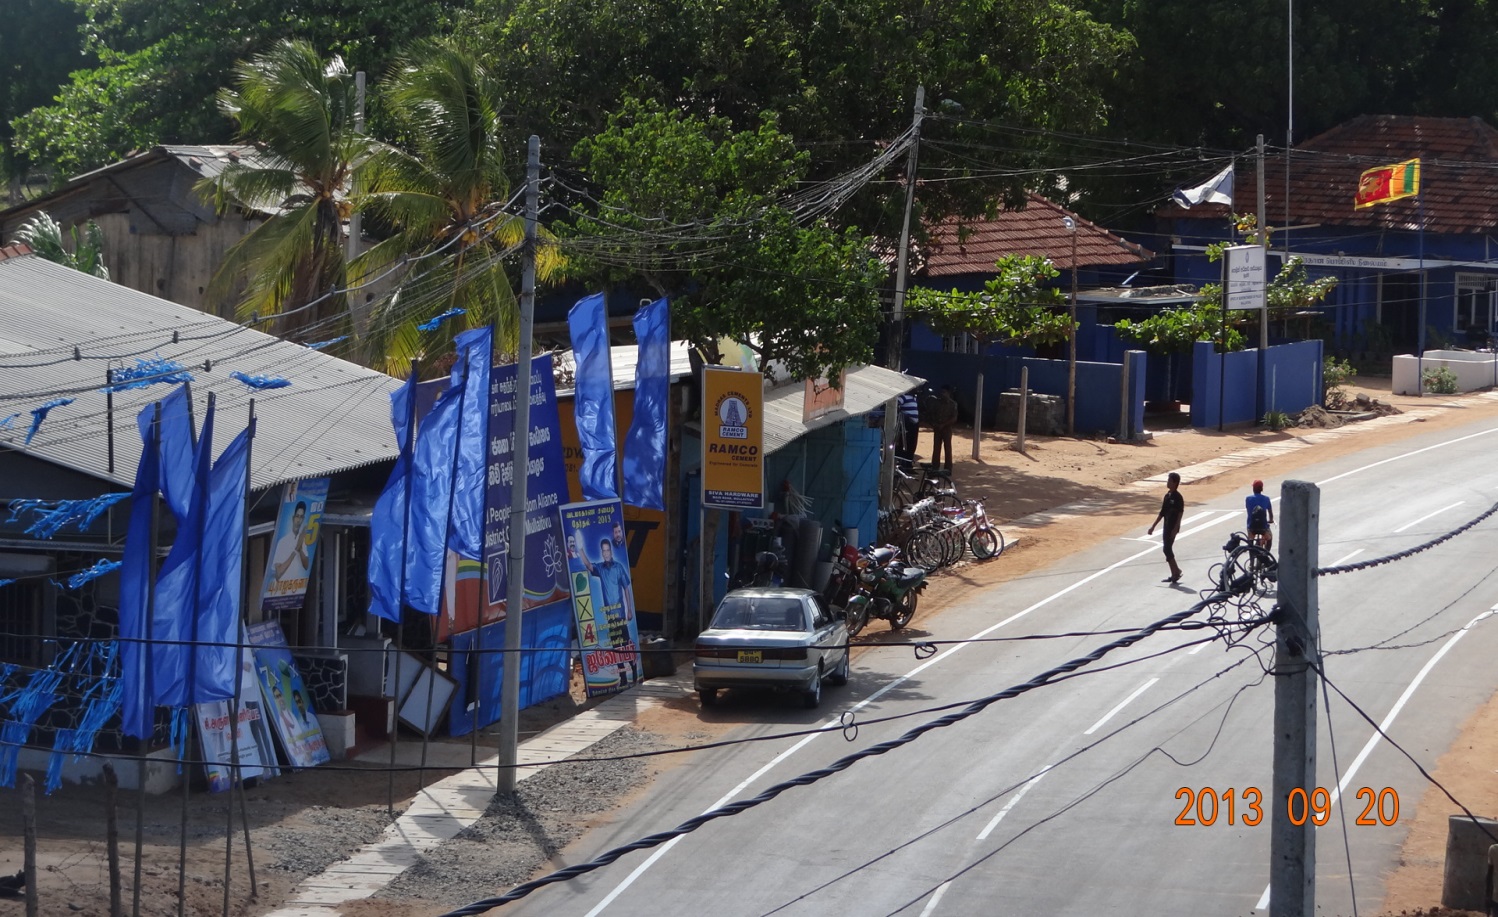 The blatant display of UPFA posters and cut-outs even on 20 Sep 2013, adjacent to the Mullaitivu SP Janaka Gunathilaka’s office in the heart of the town.